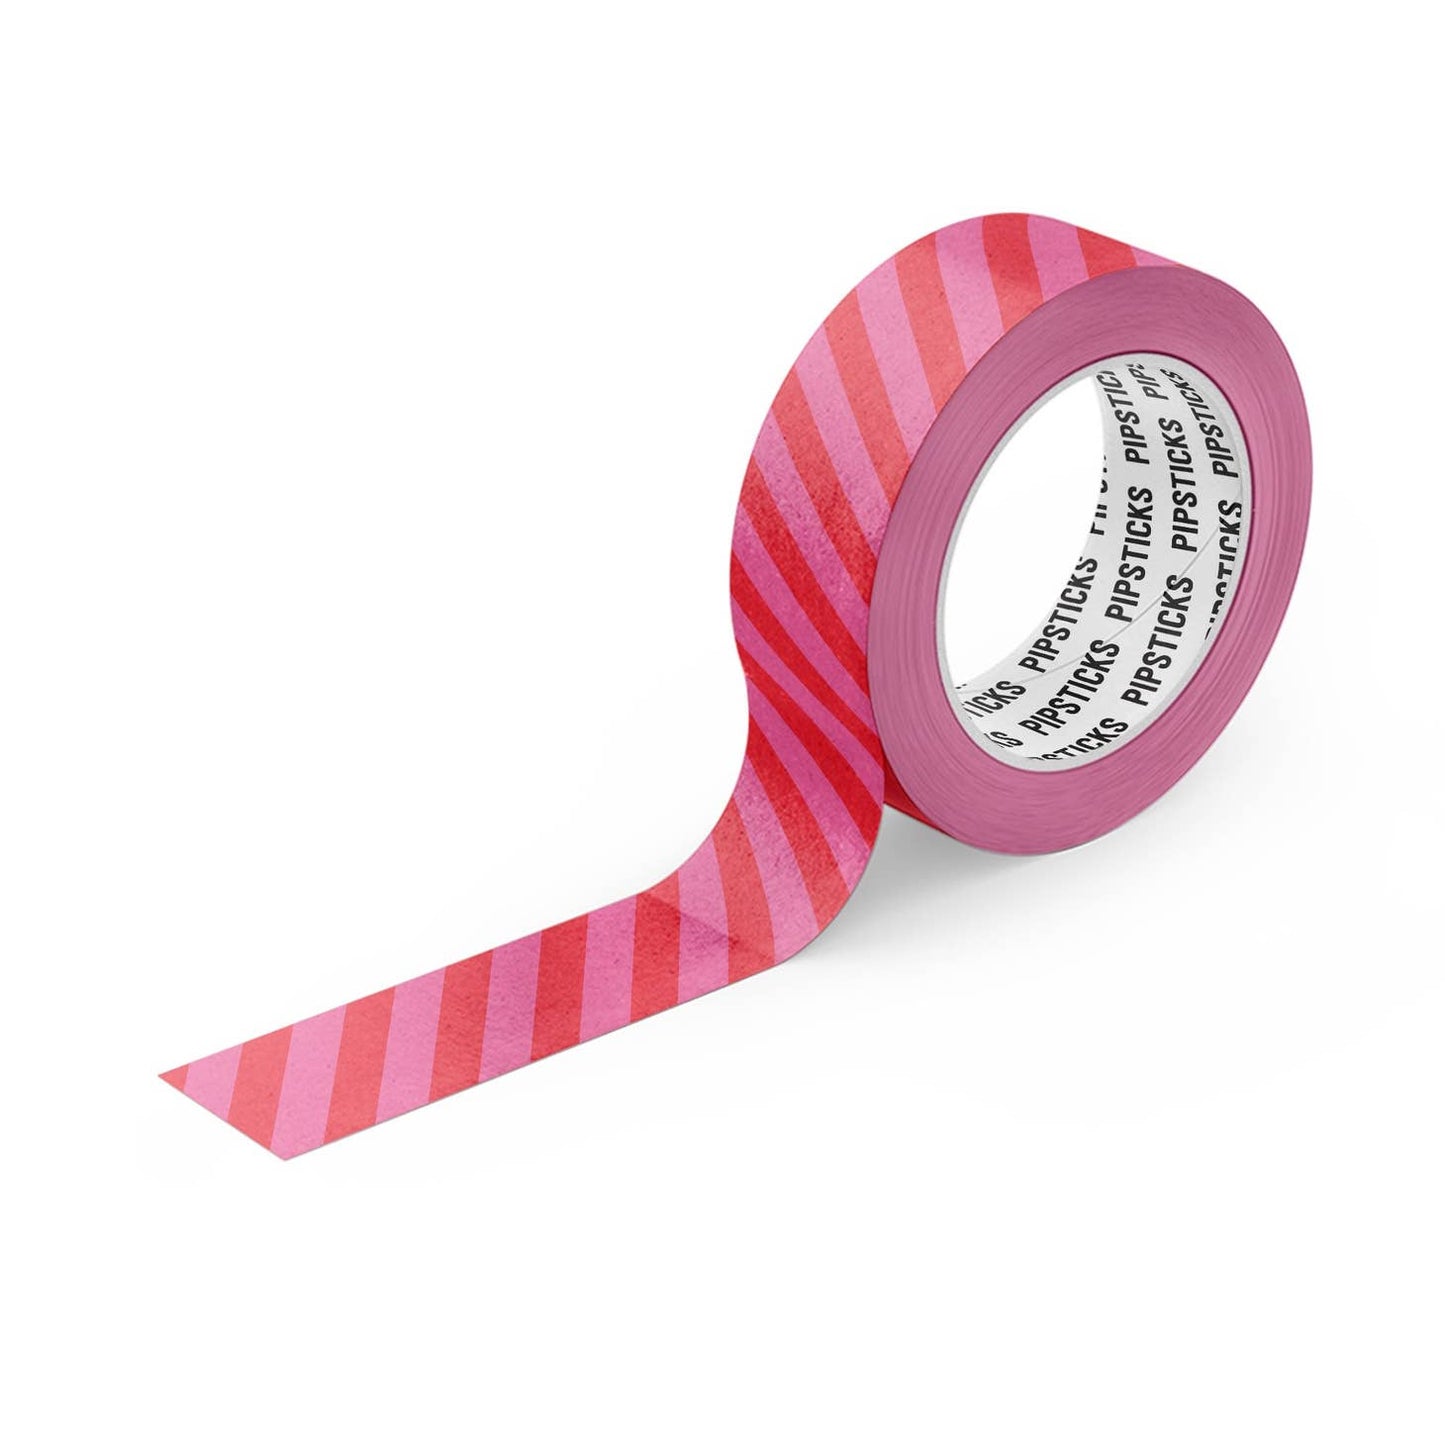 Candy Cane Lane Washi Tape - Favorite Little Things Co